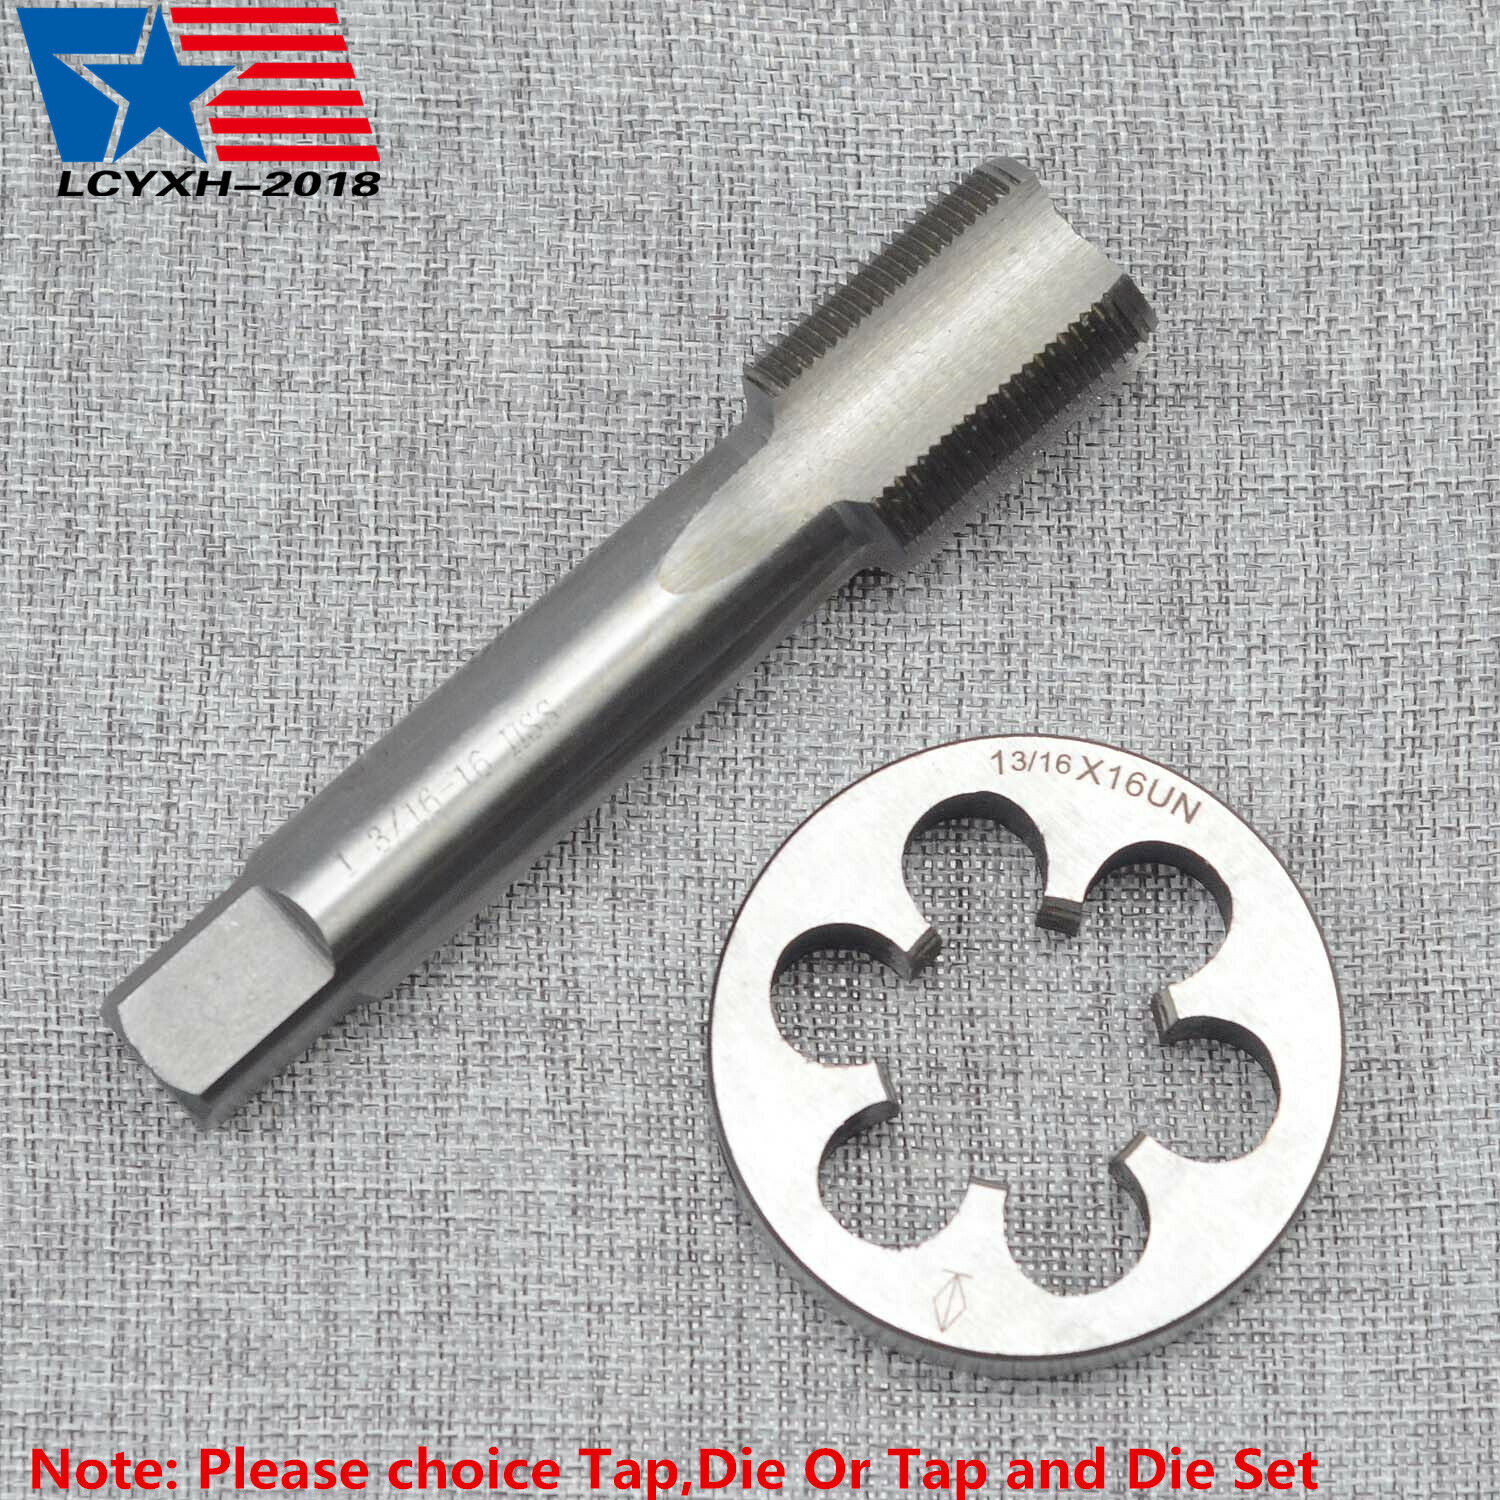 New 1 3/16 - 16 Right Hand Thread Tap,die, Tap And Die 1 3/16"- 16 Tpi Un Usa